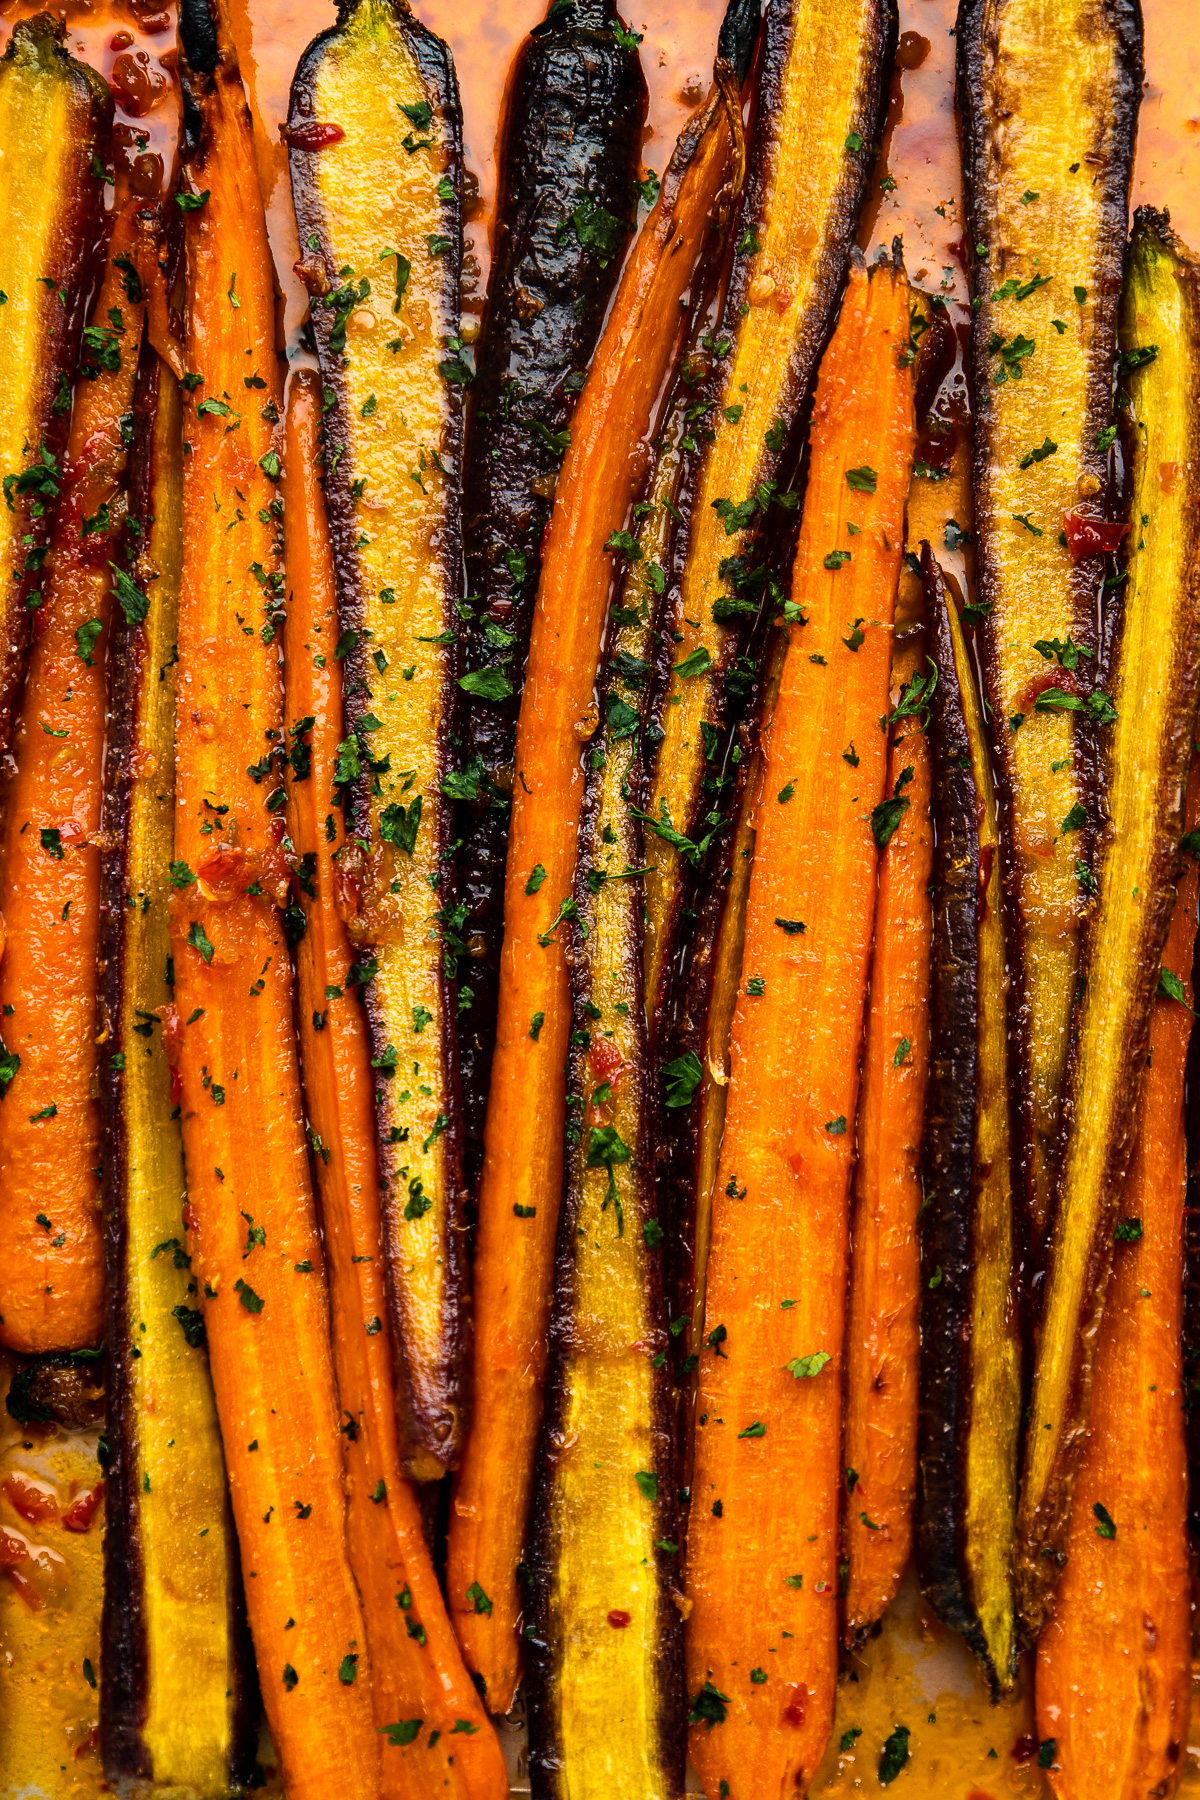 roasted carrots arranged on a sheet tray, garnished with fresh parsley.